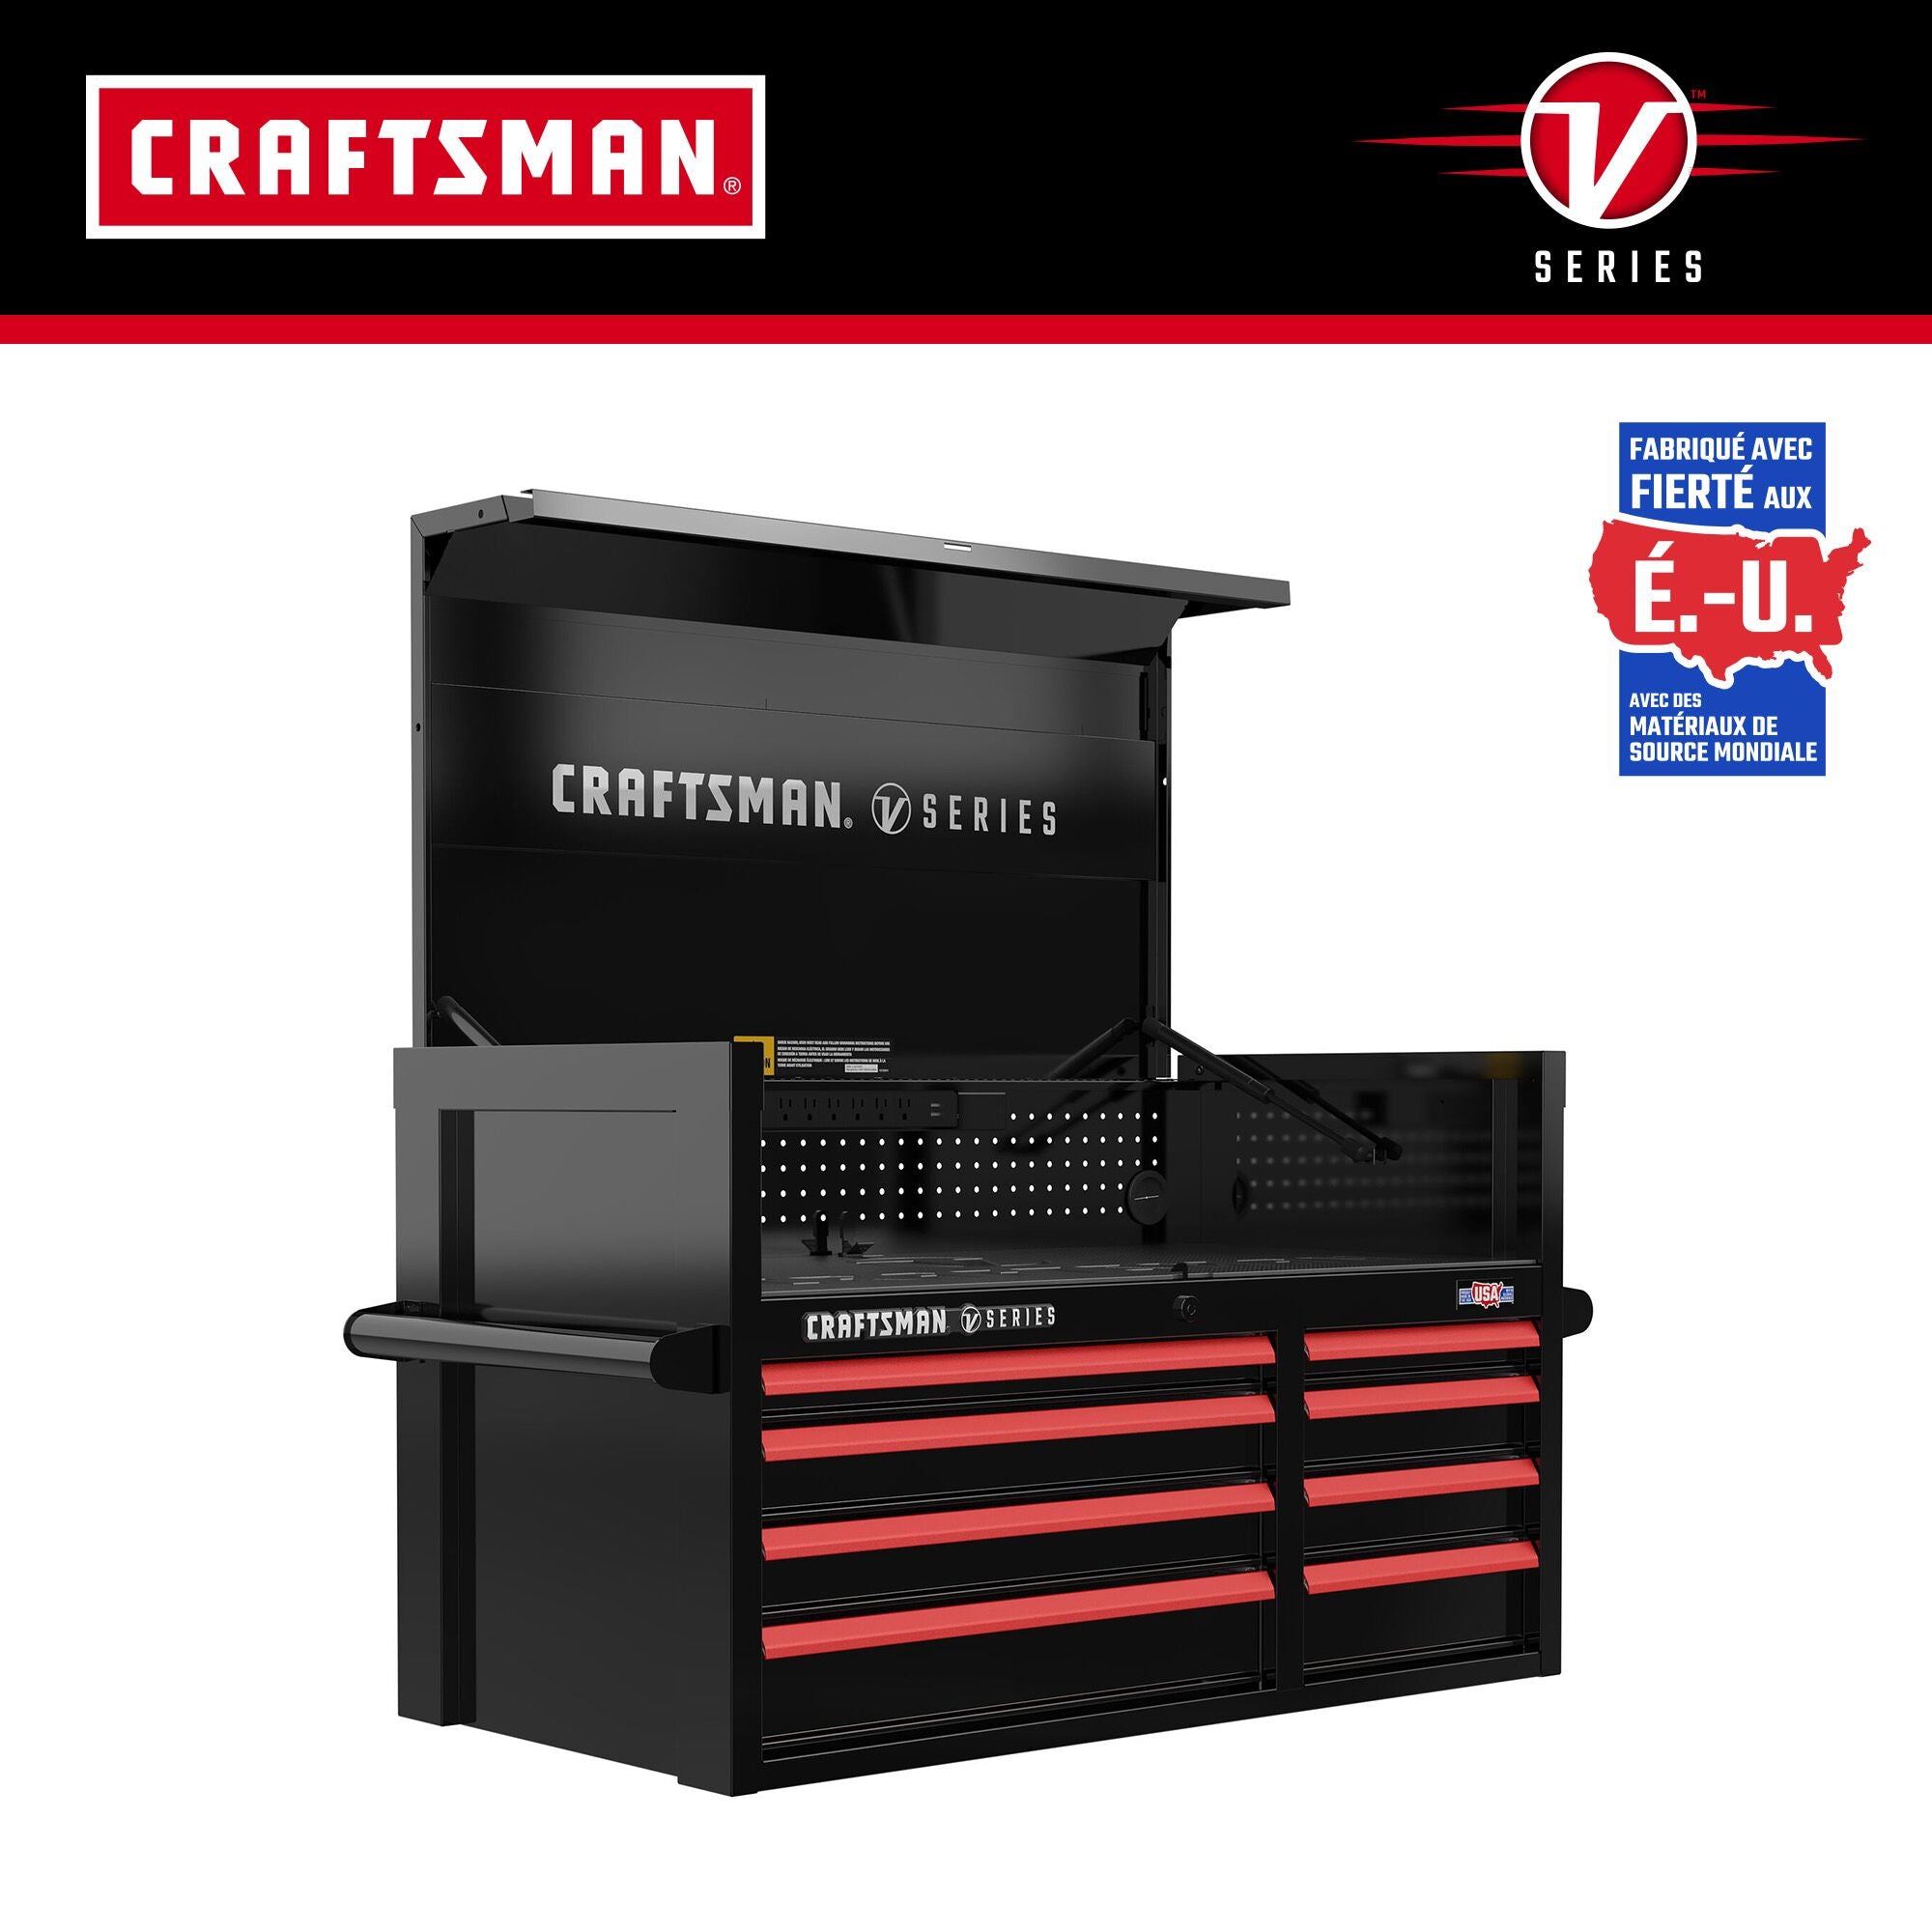 CRAFTSMAN V-Series 41-inch chest with V-Series and Made in the USA logos